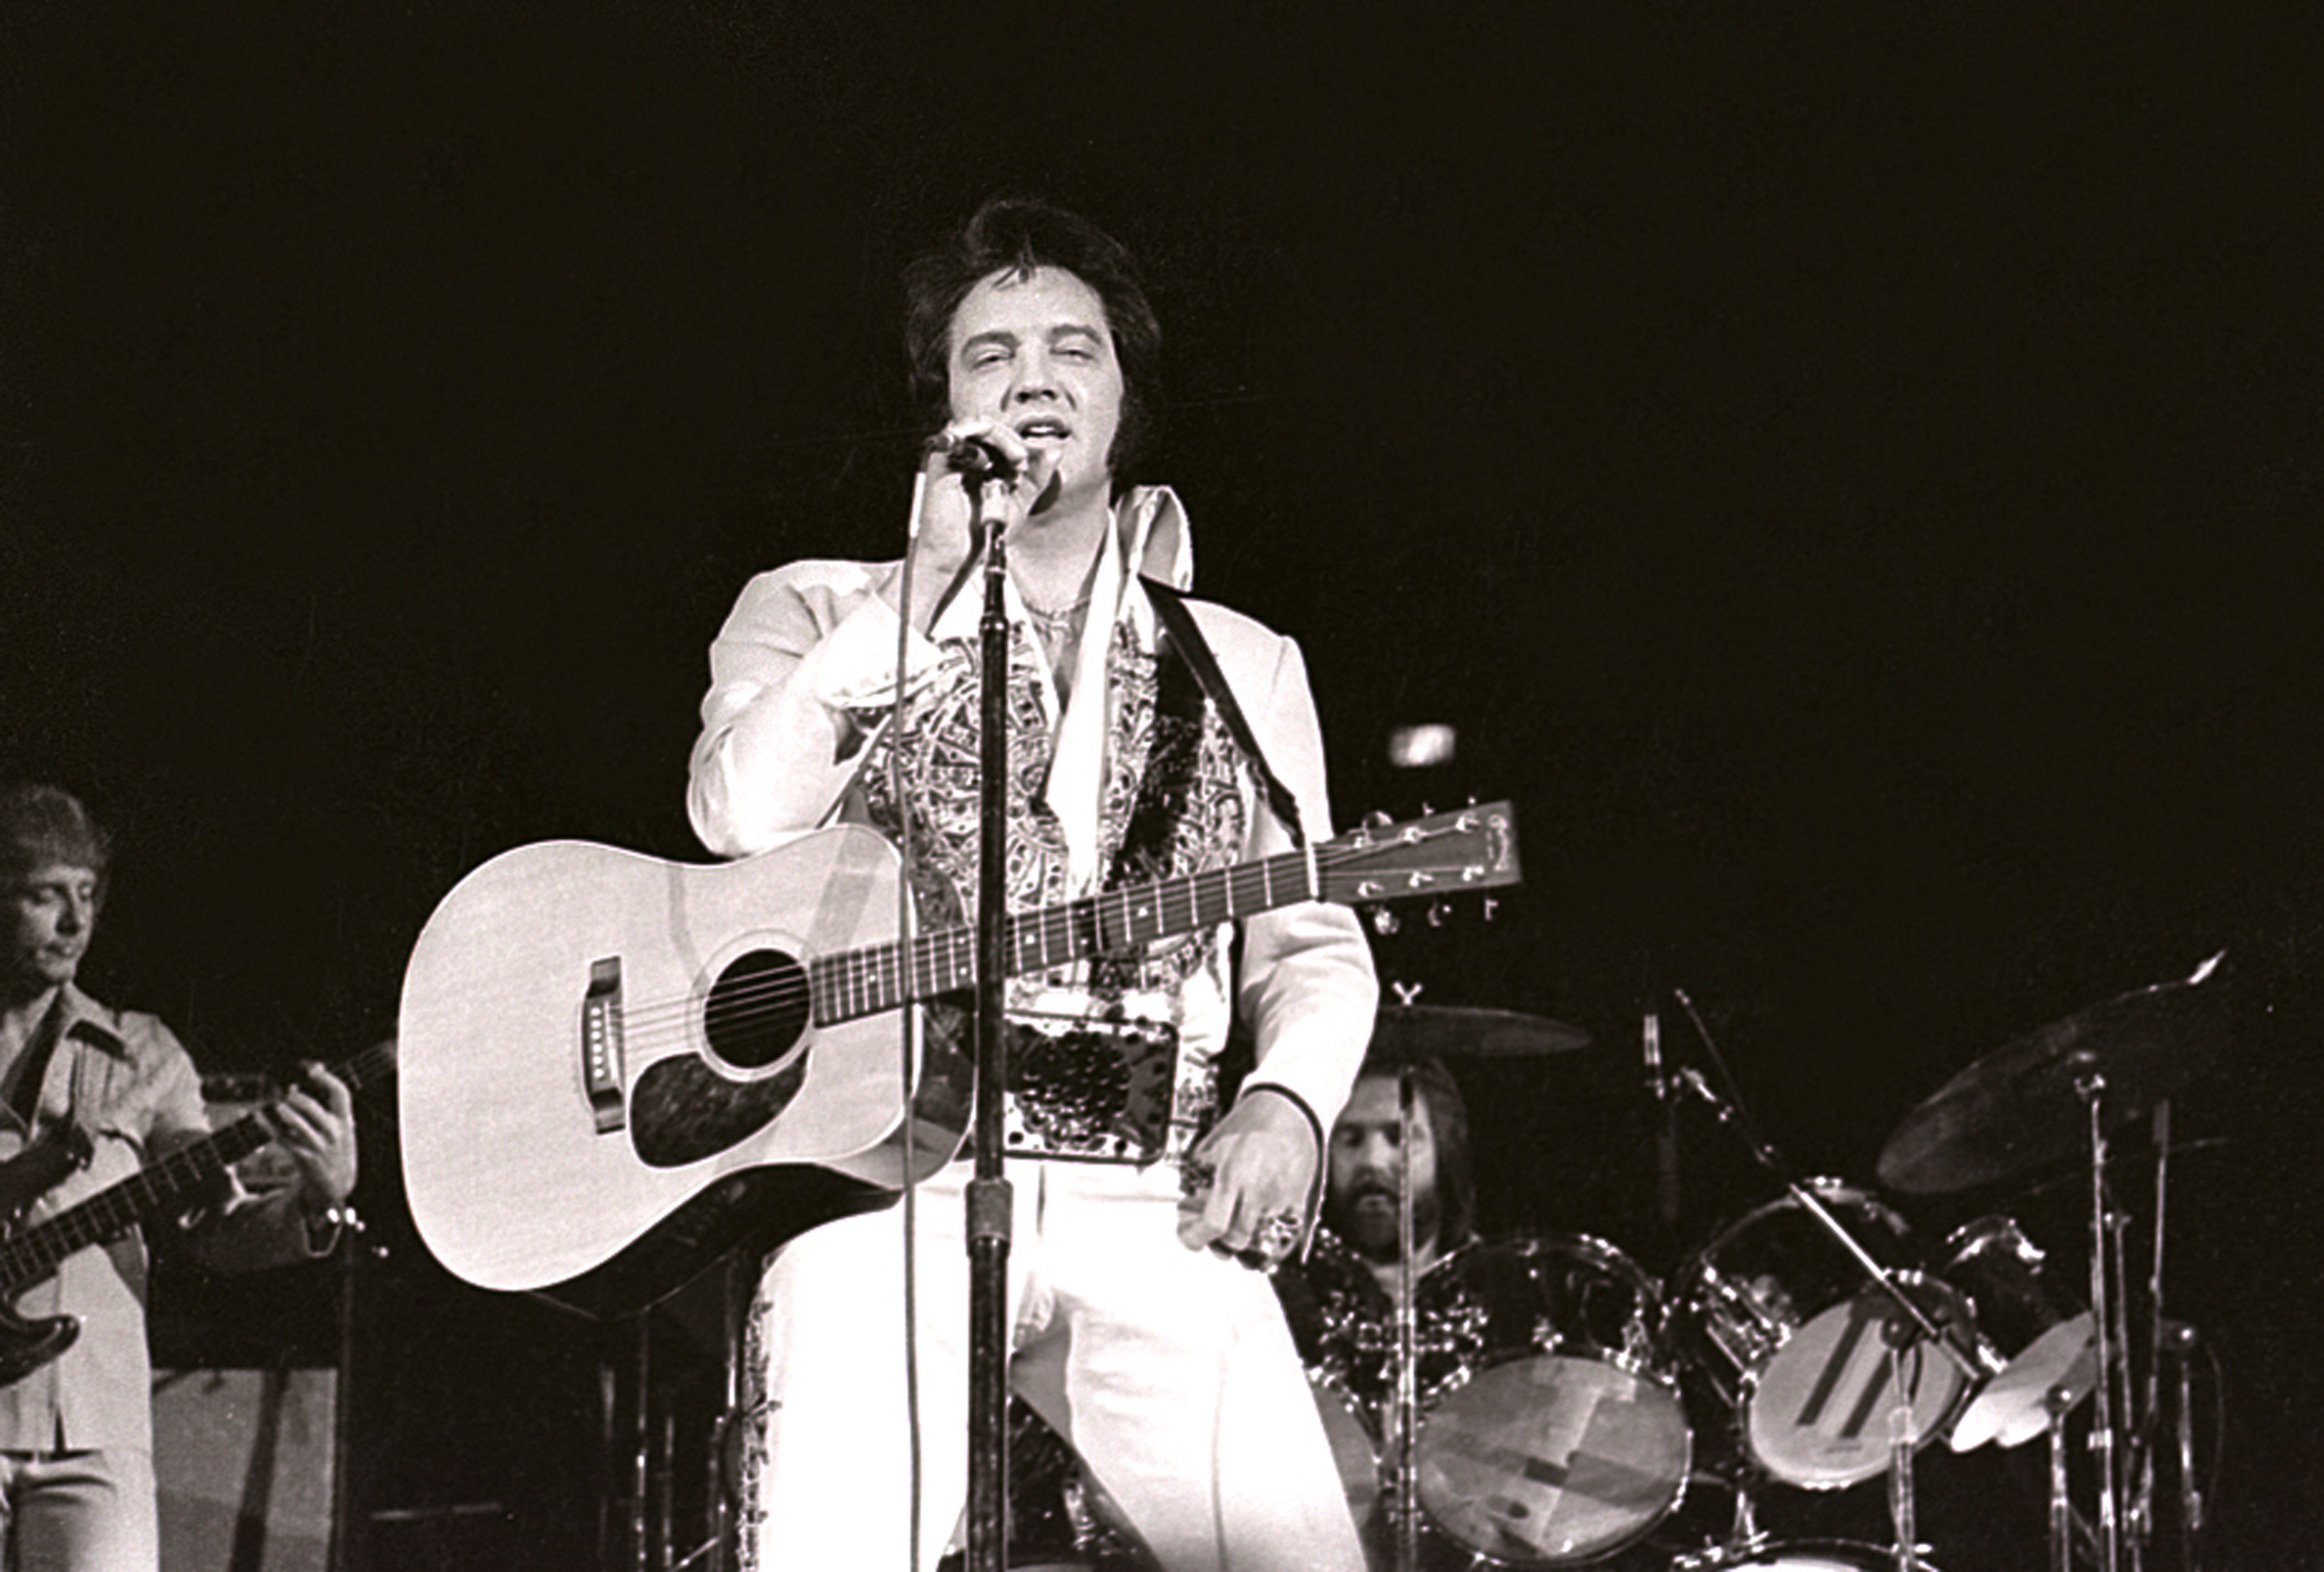 Elvis Presley onstage in the mid-'70s. I Image: Getty Images.